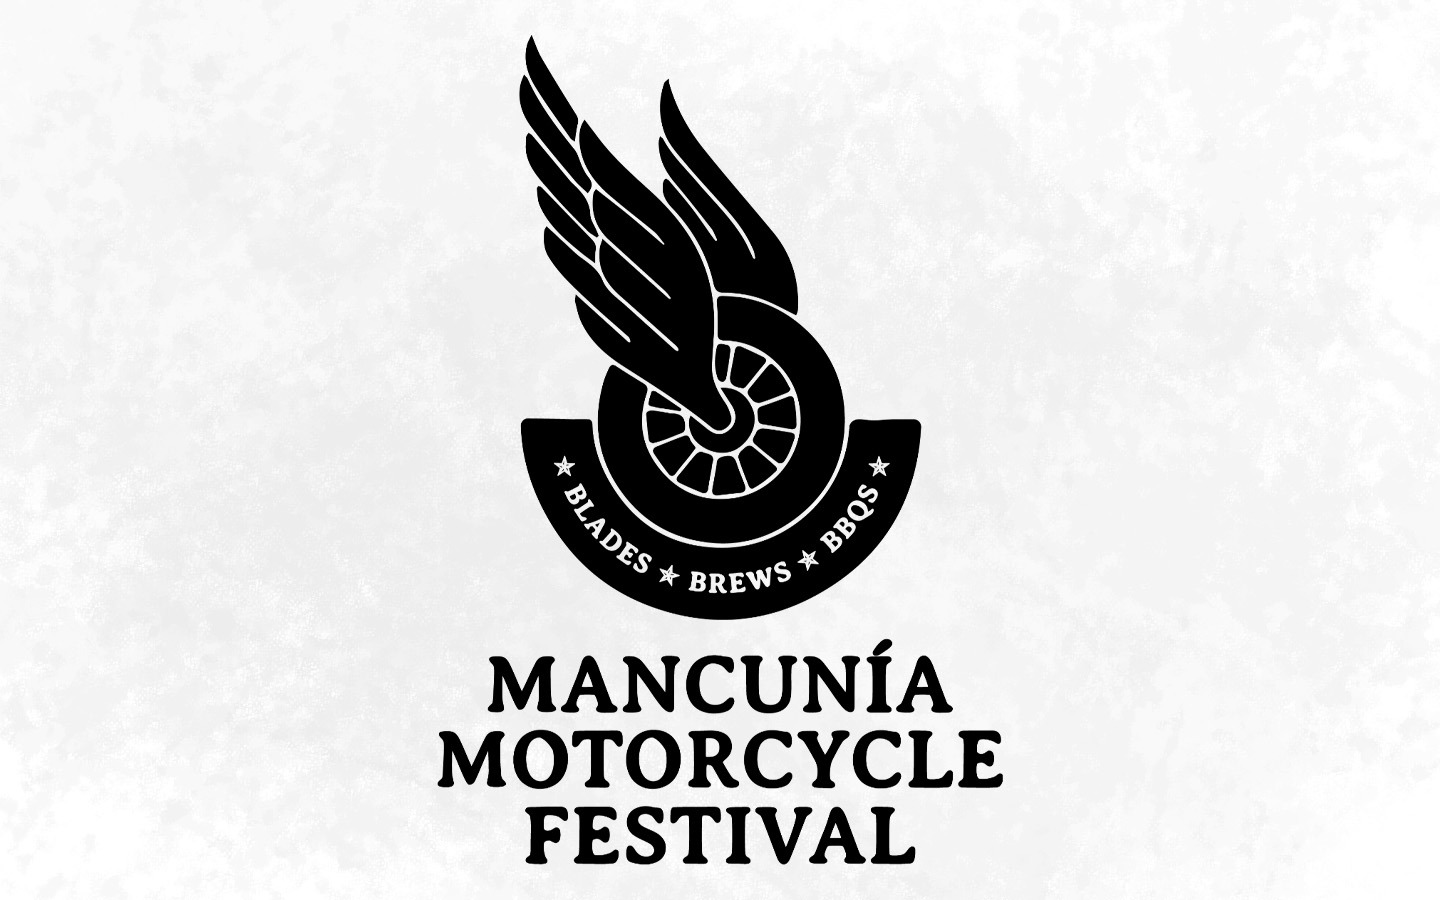 New motorcycle show Mancunia Motorcycle Festival set to... Visordown